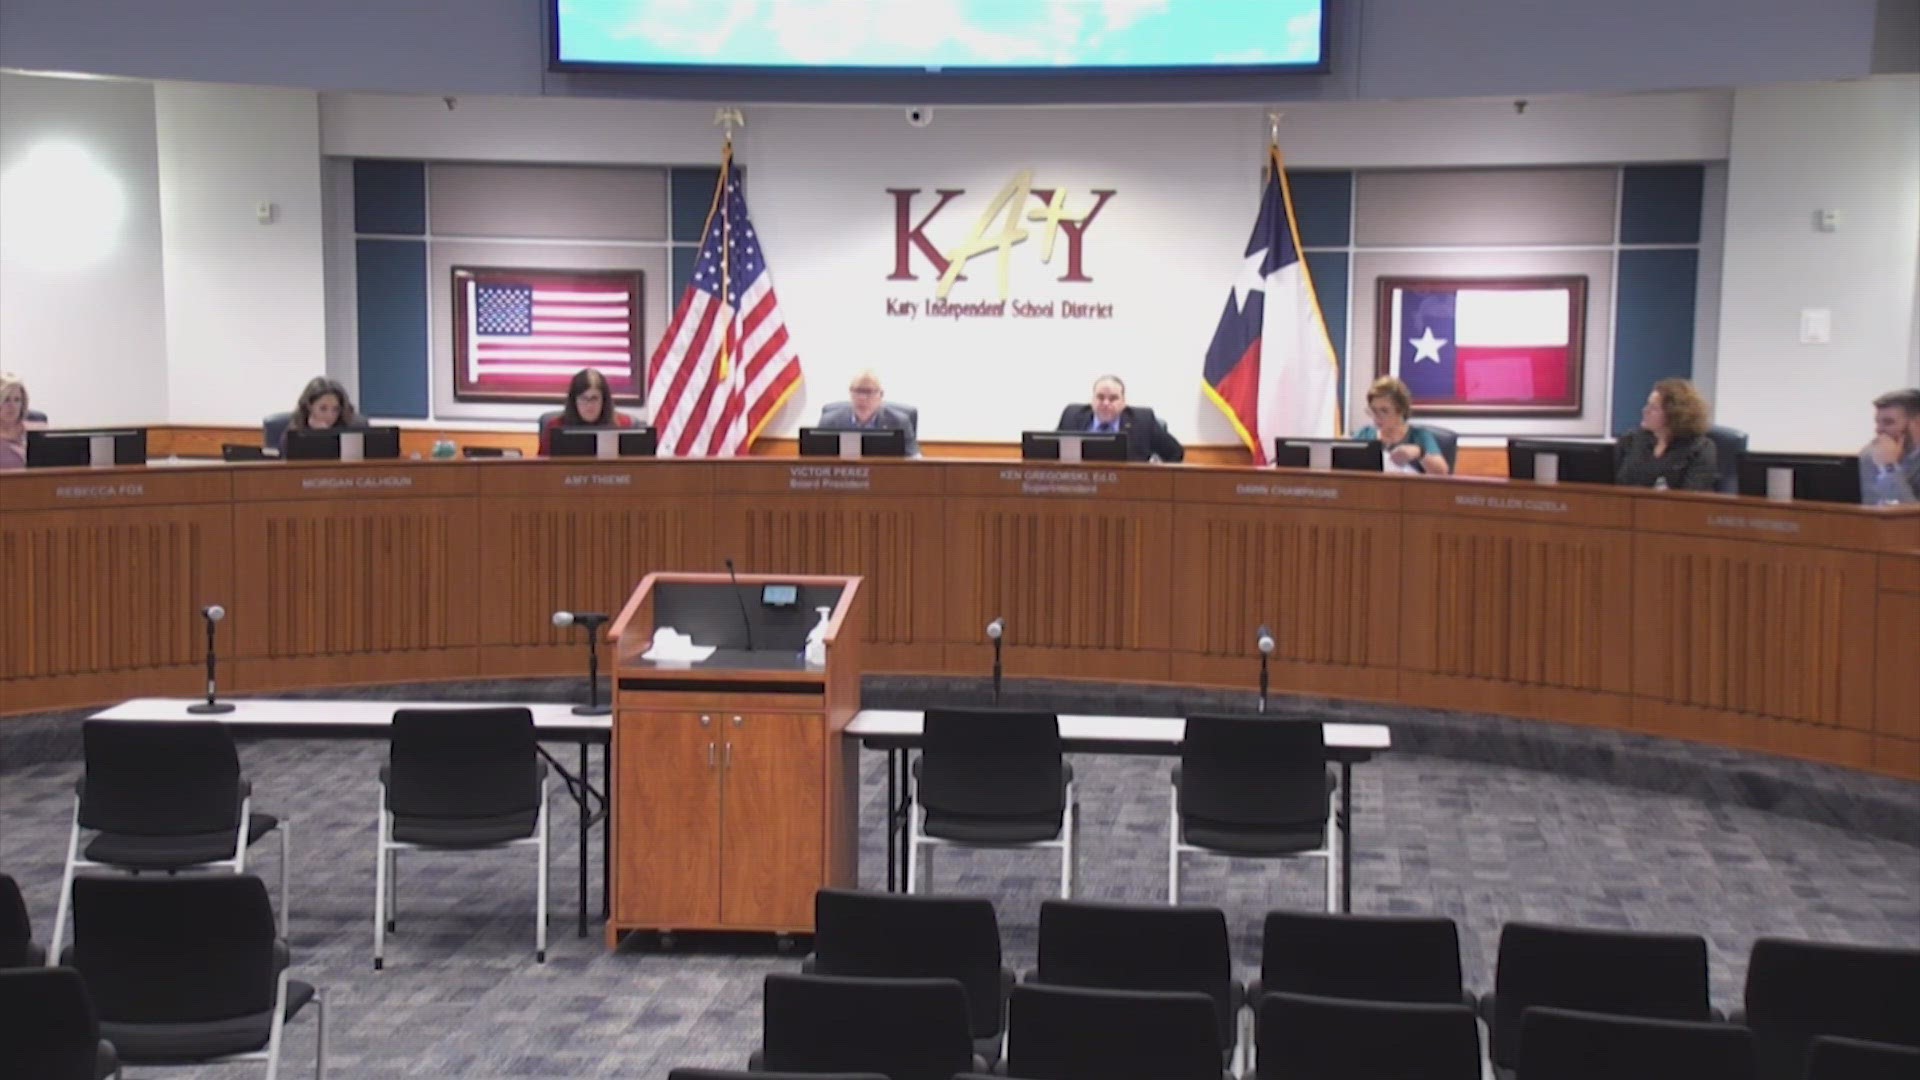 The Katy ISD Board of Trustees met to discuss allowing chaplains to counsel students with an official vote set for Monday.